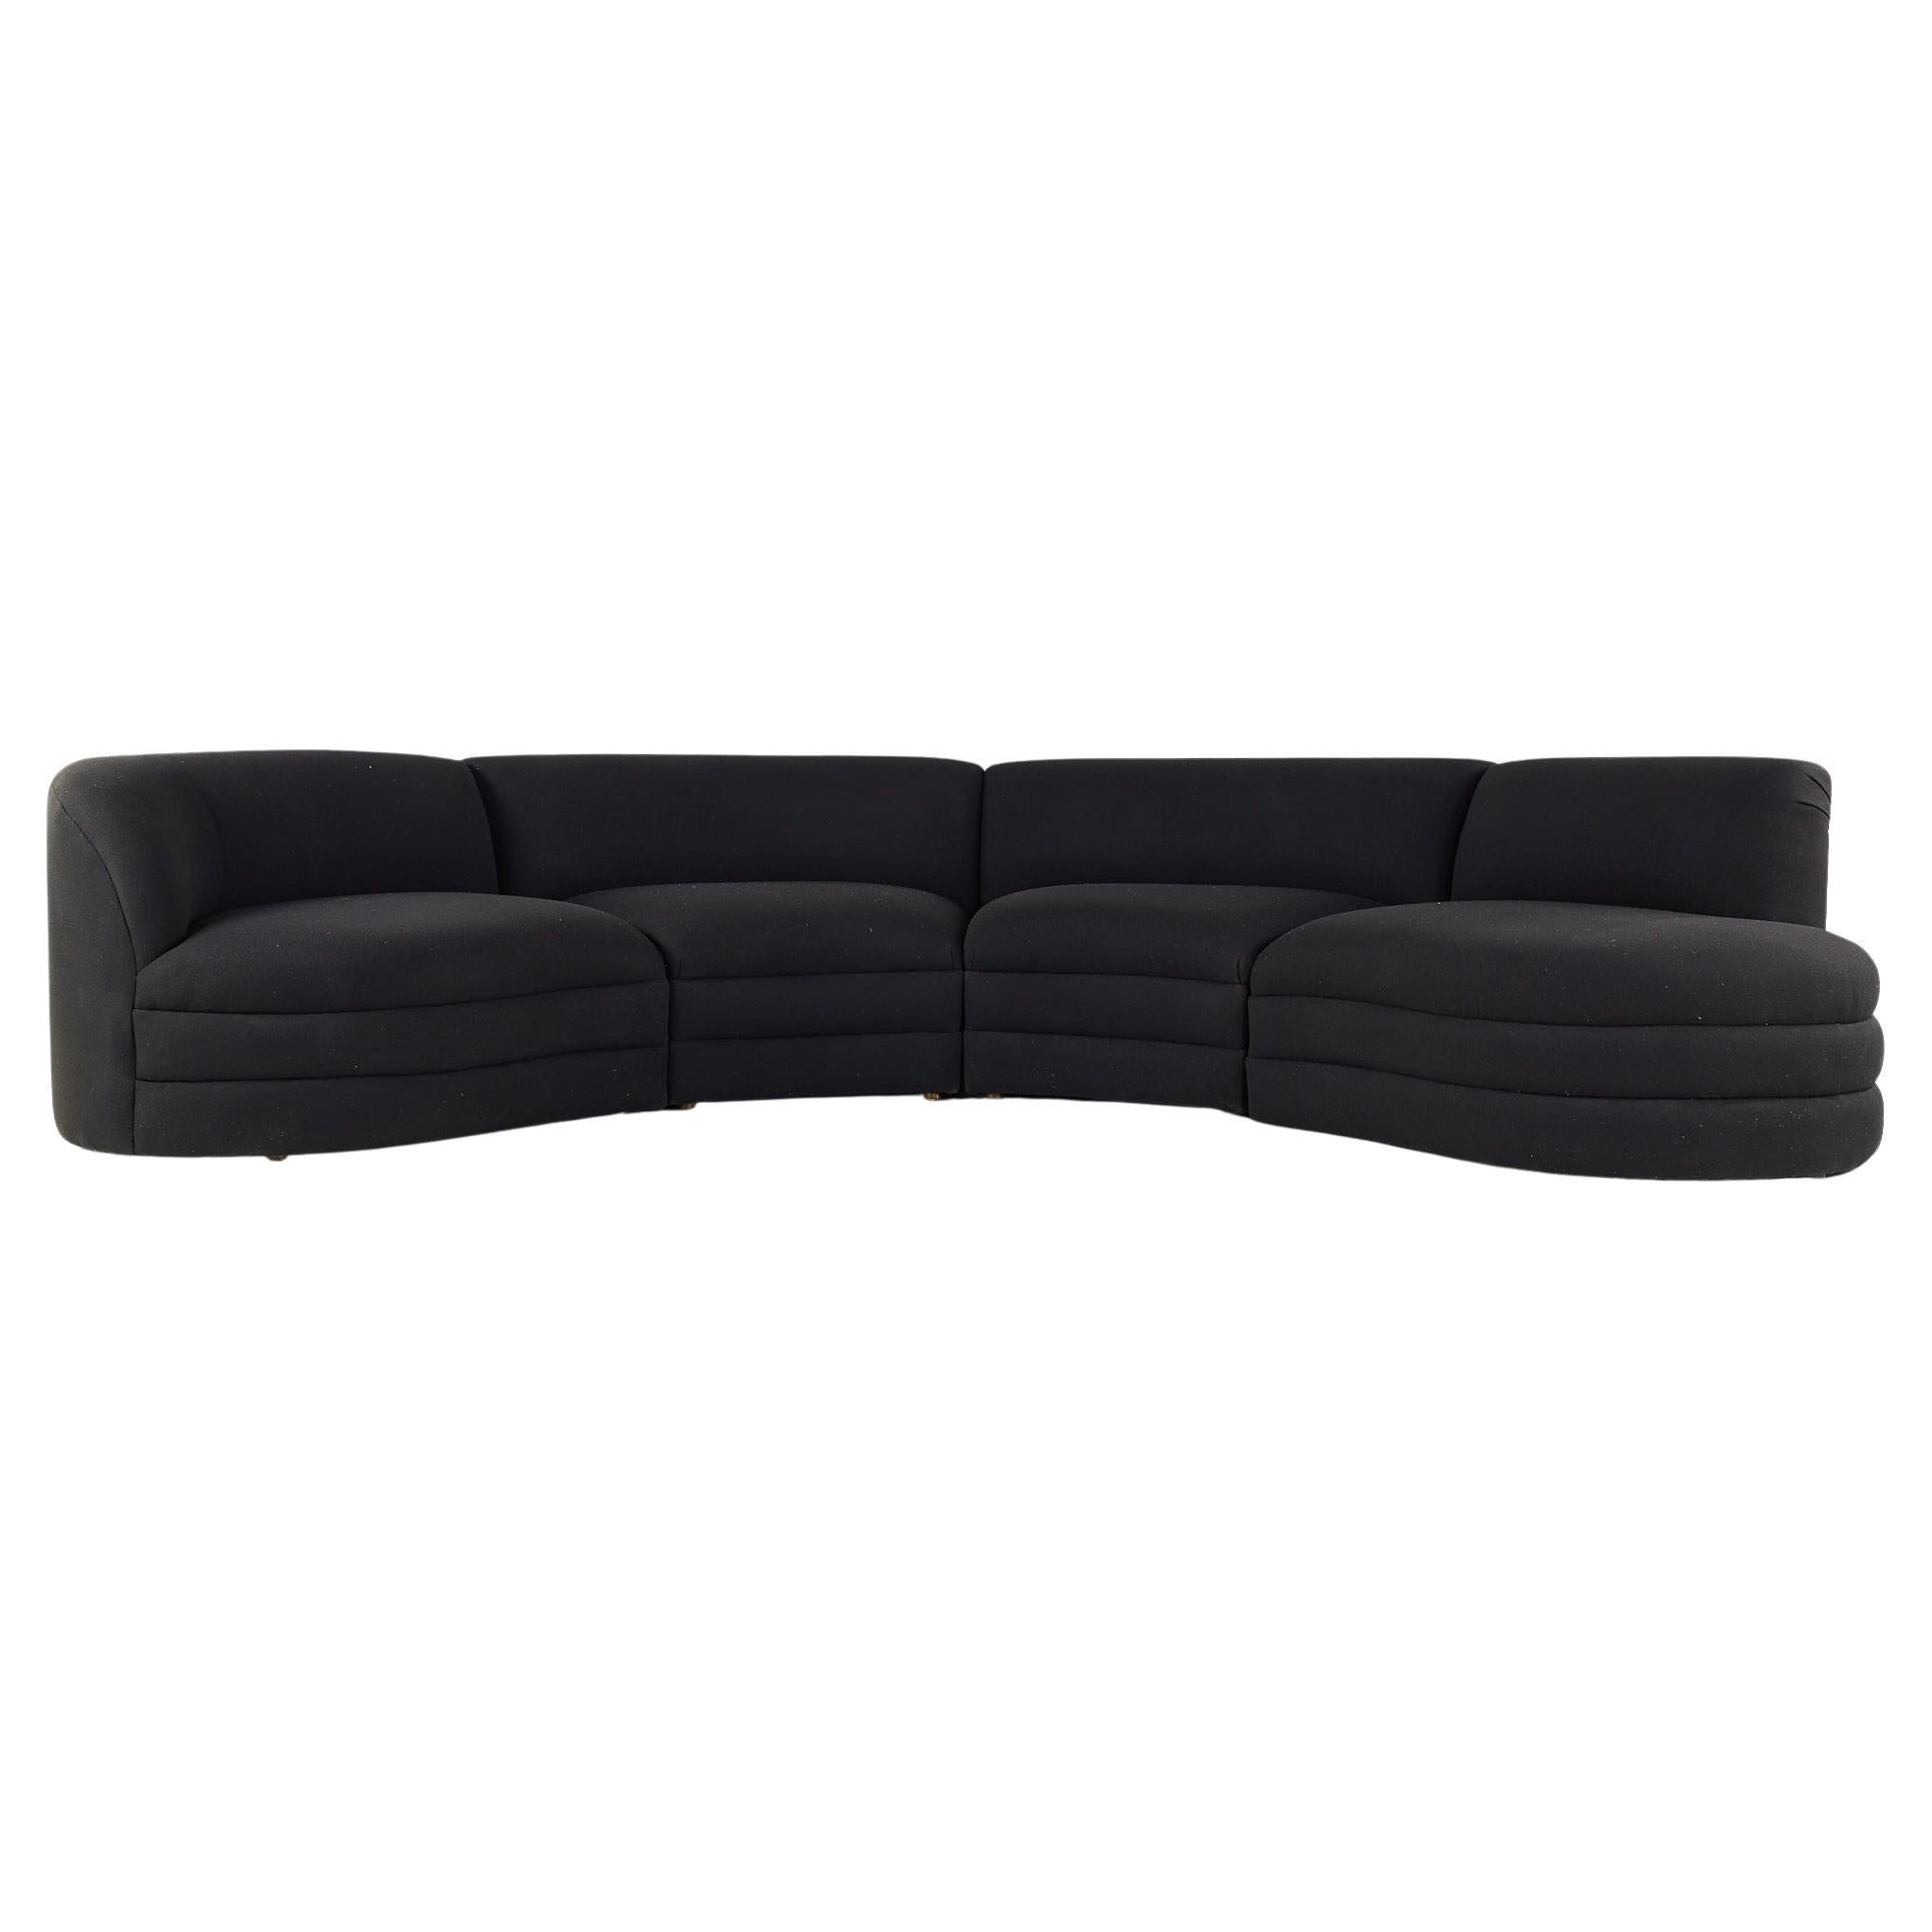 Weiman Midcentury Curved Sectional Sofa